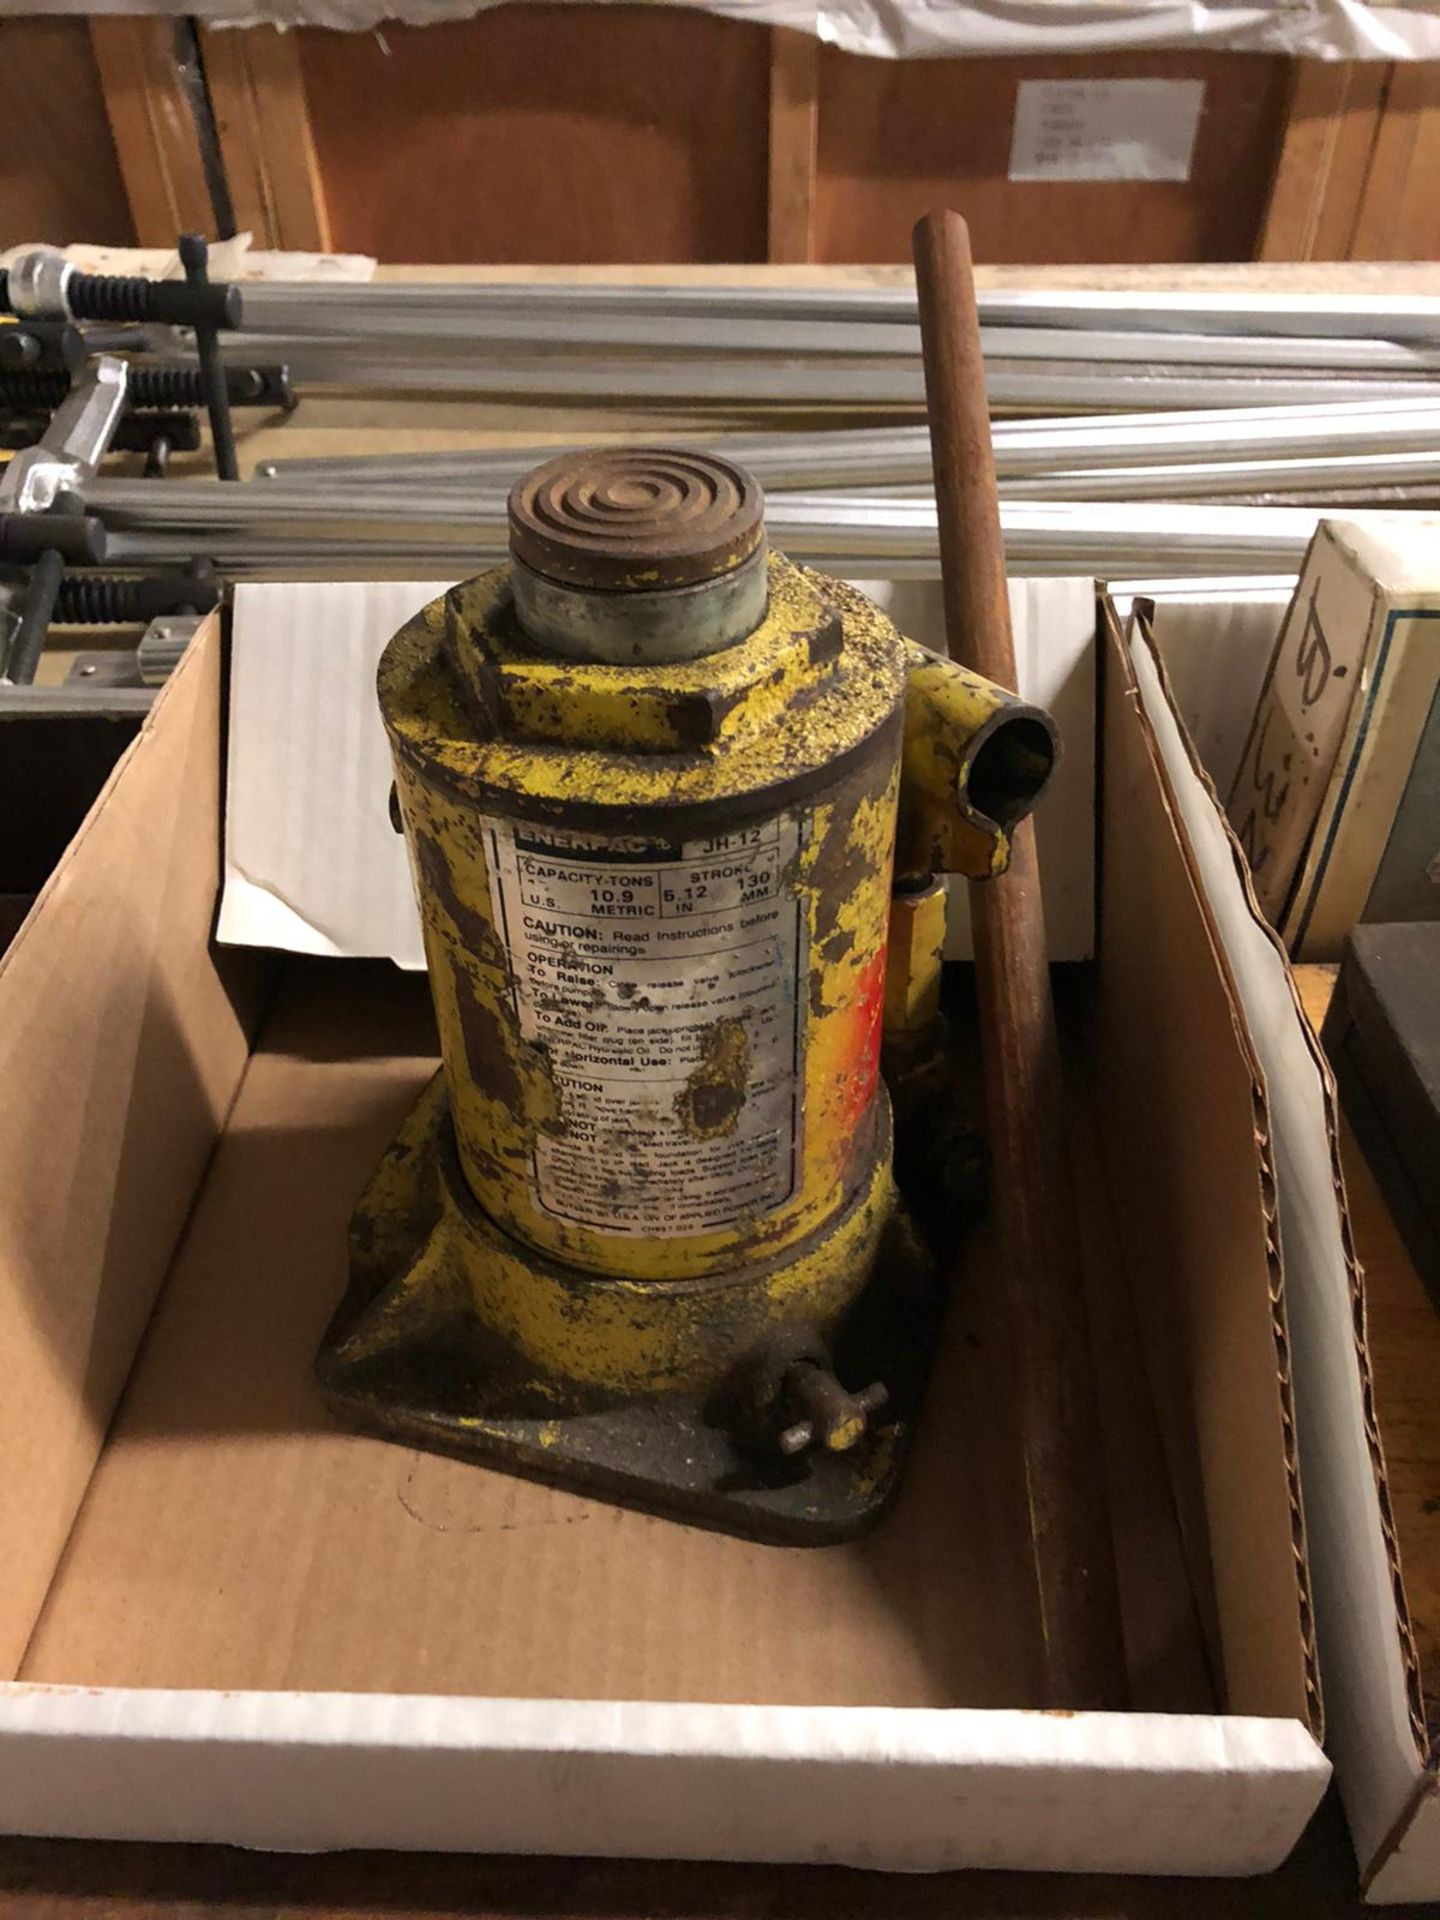 Enerpac JH-12 Hydraulic Cylinder Jack 10.9 Metric Tons with 5.12" stroke